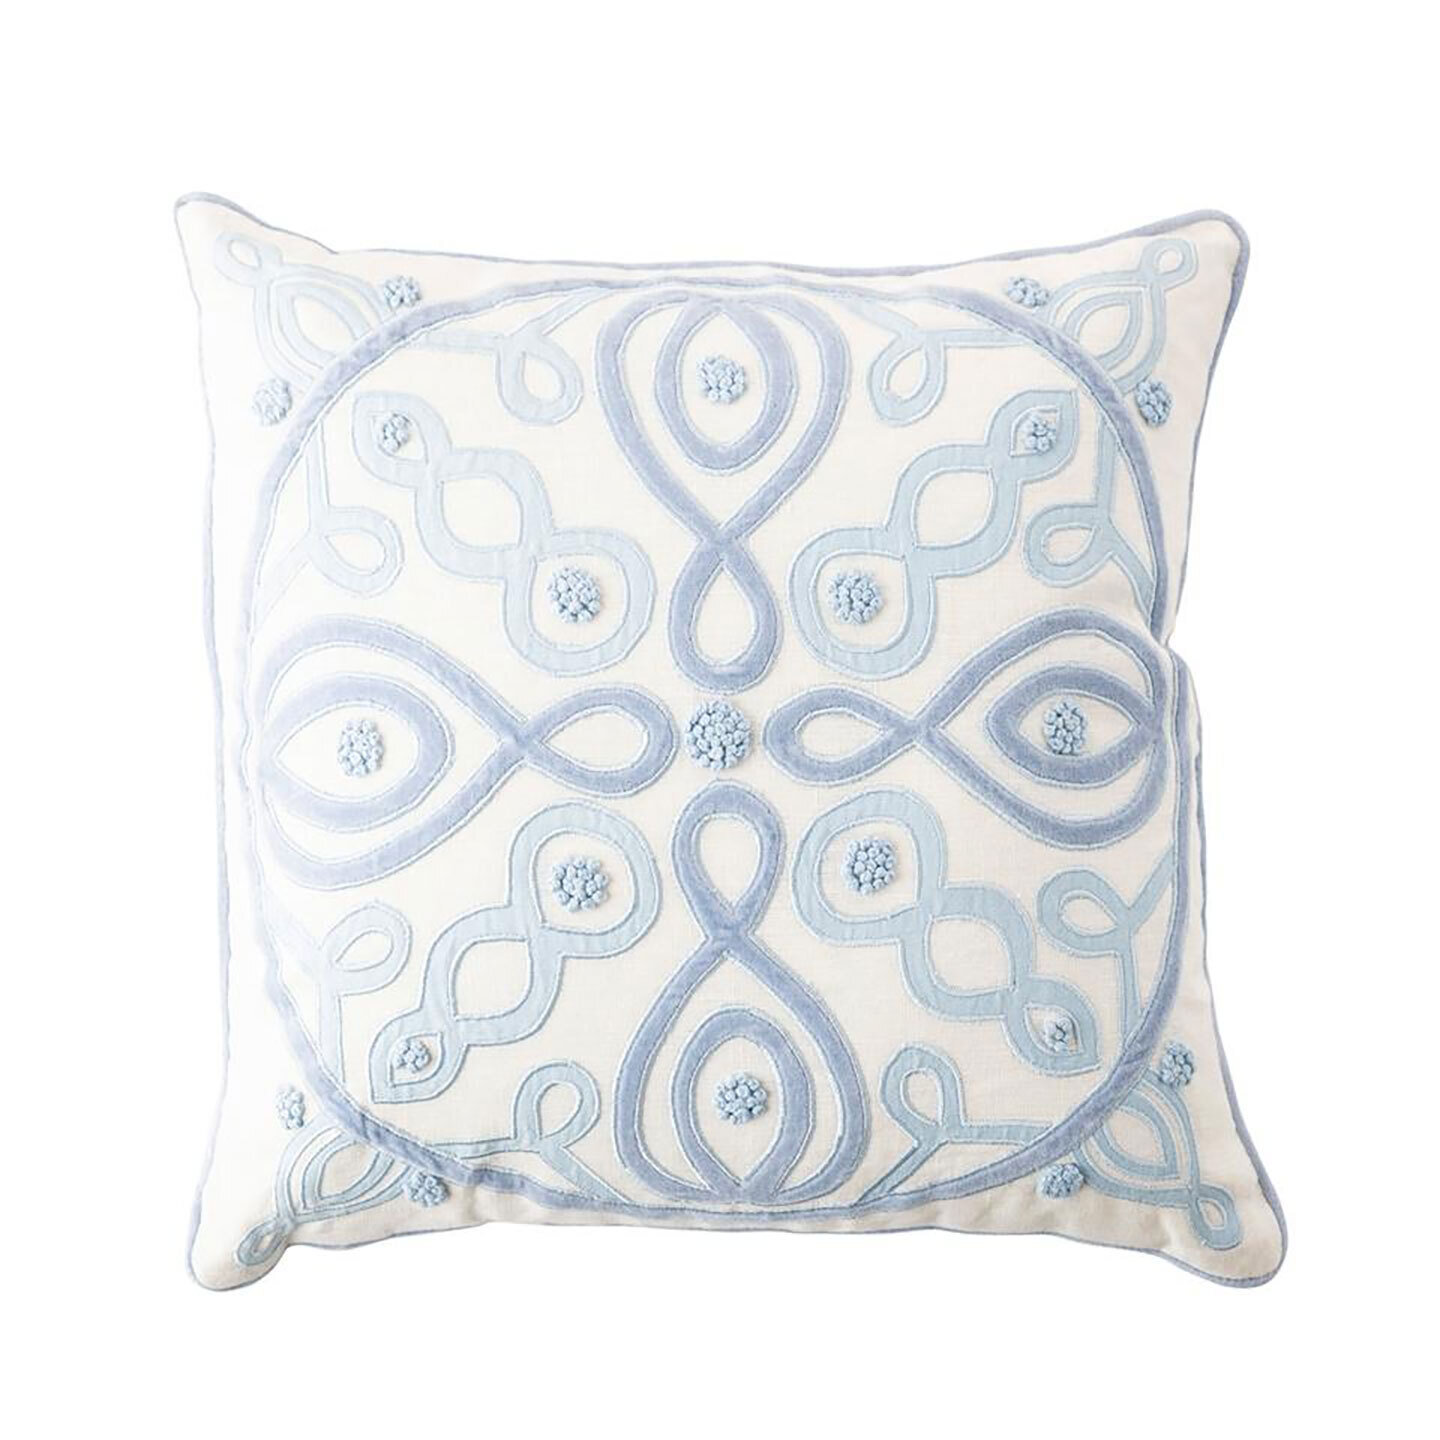 Juliska Berry and Thread Chambray White 18 Inch x 18 Inch Pillow PW20/47